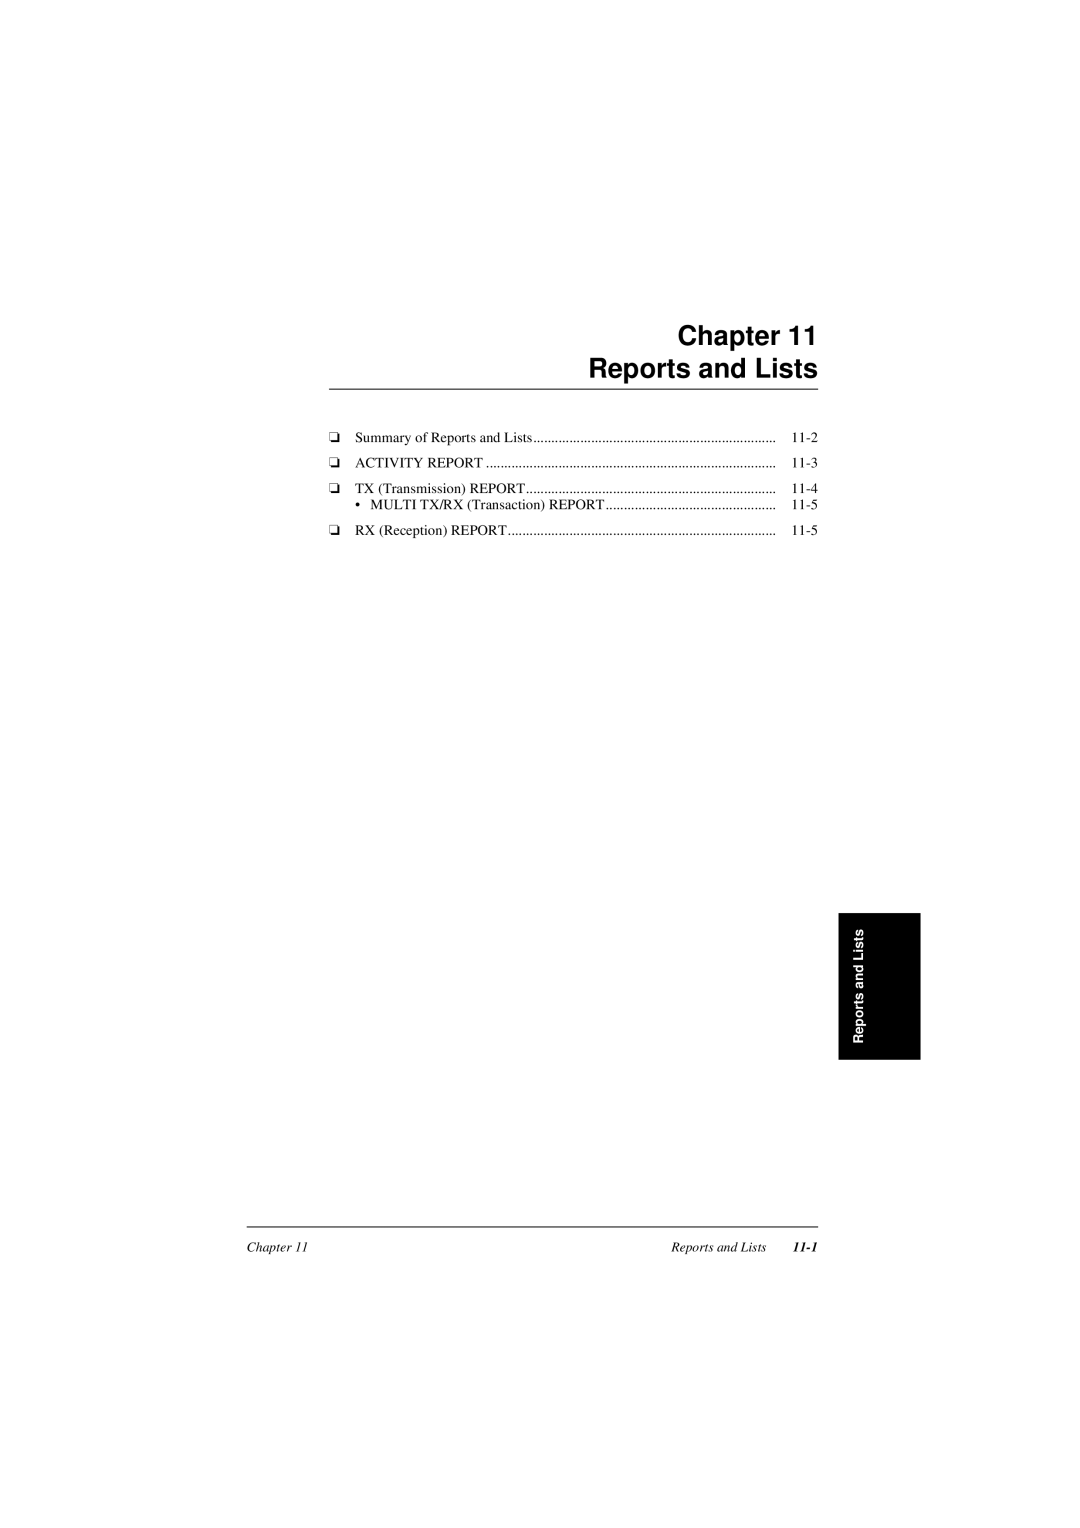 Canon L240, L290 manual Chapter Reports and Lists, 11-1 